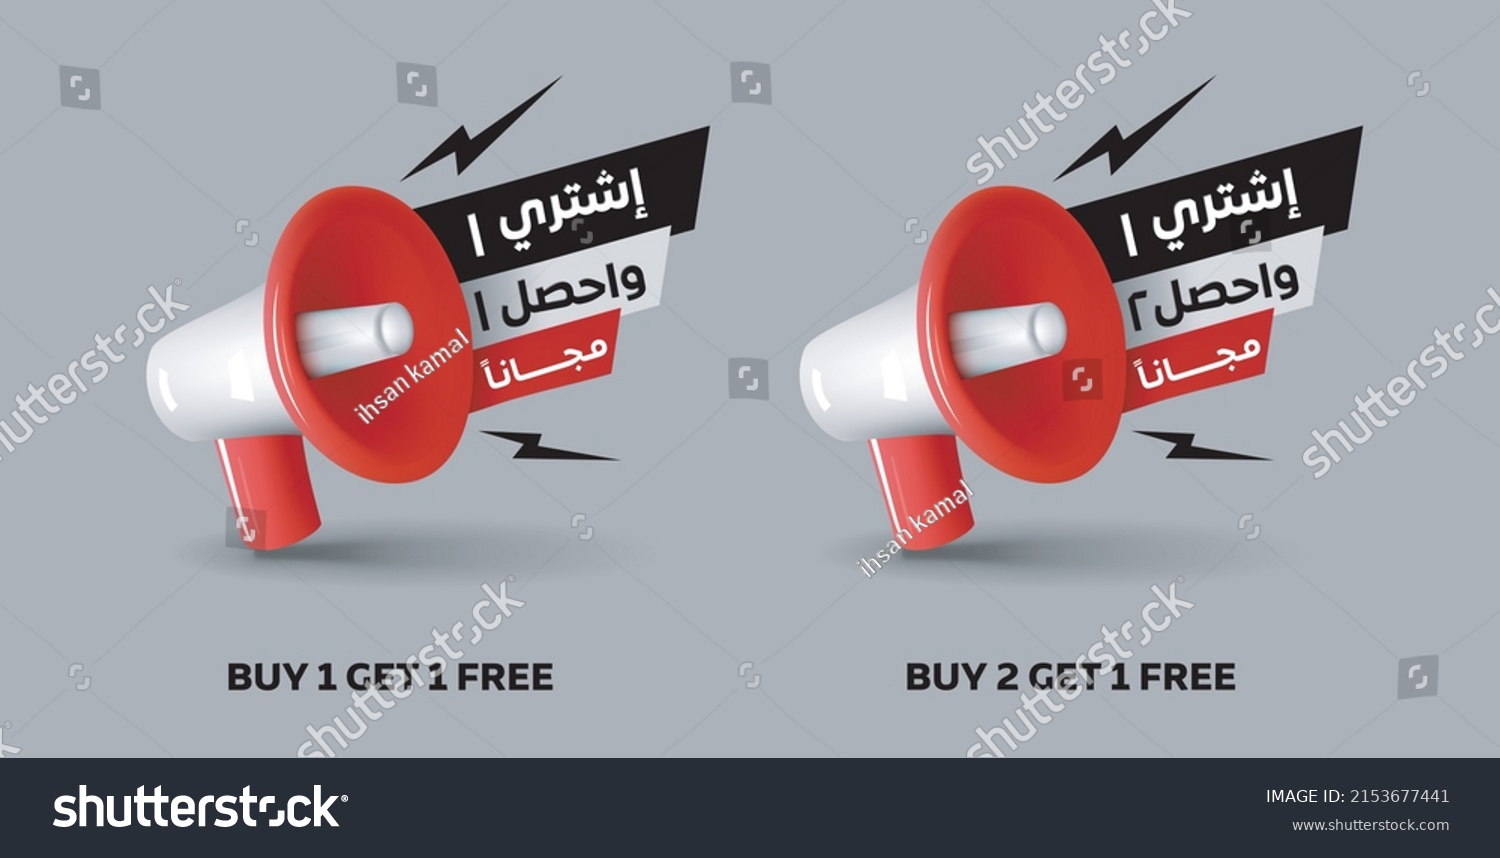 SVG of LOUDSPEAKER WITH ARABIC TEXT. TRANSLATION BUY 2 GET 1 FREE AND BUY 1 GET 1 FREE. VECTOR EPS svg